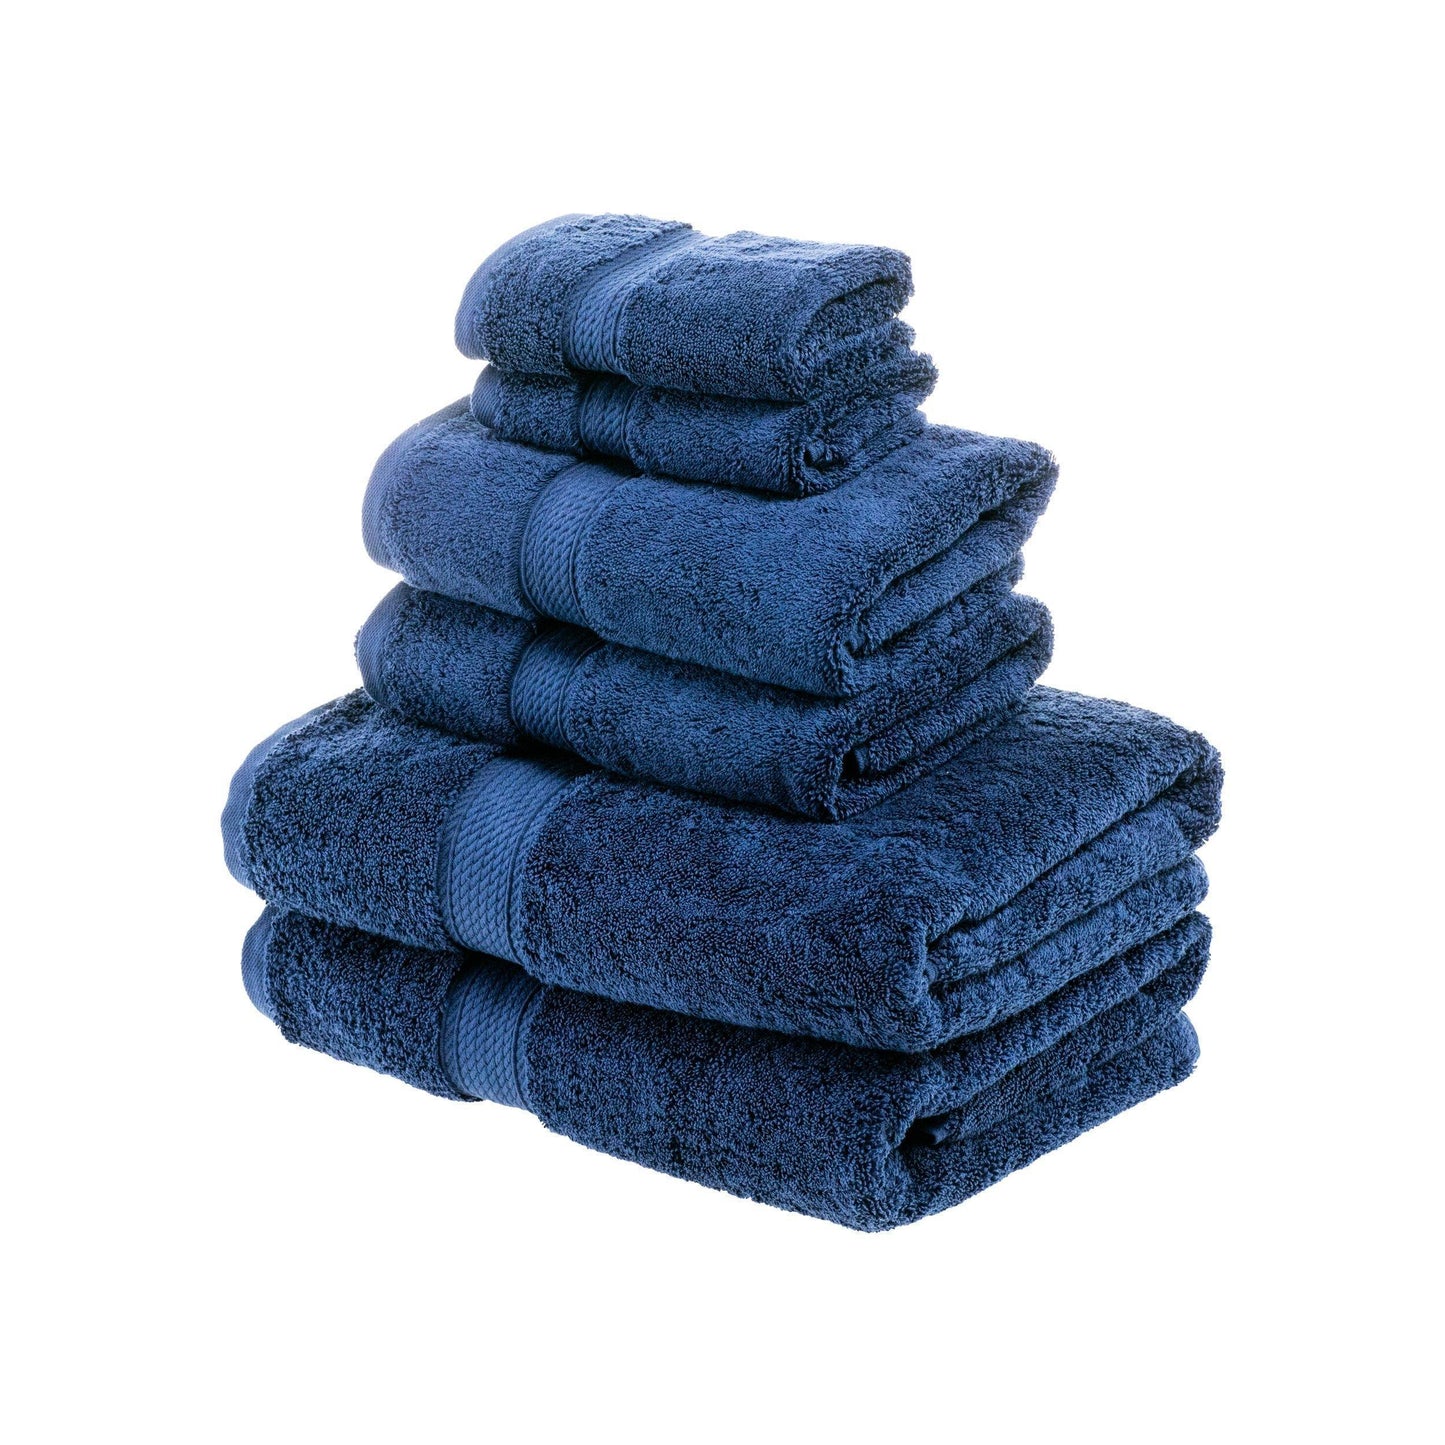 Super Plush and Absorbent Egyptian Cotton 6-Piece Towel Set FredCo